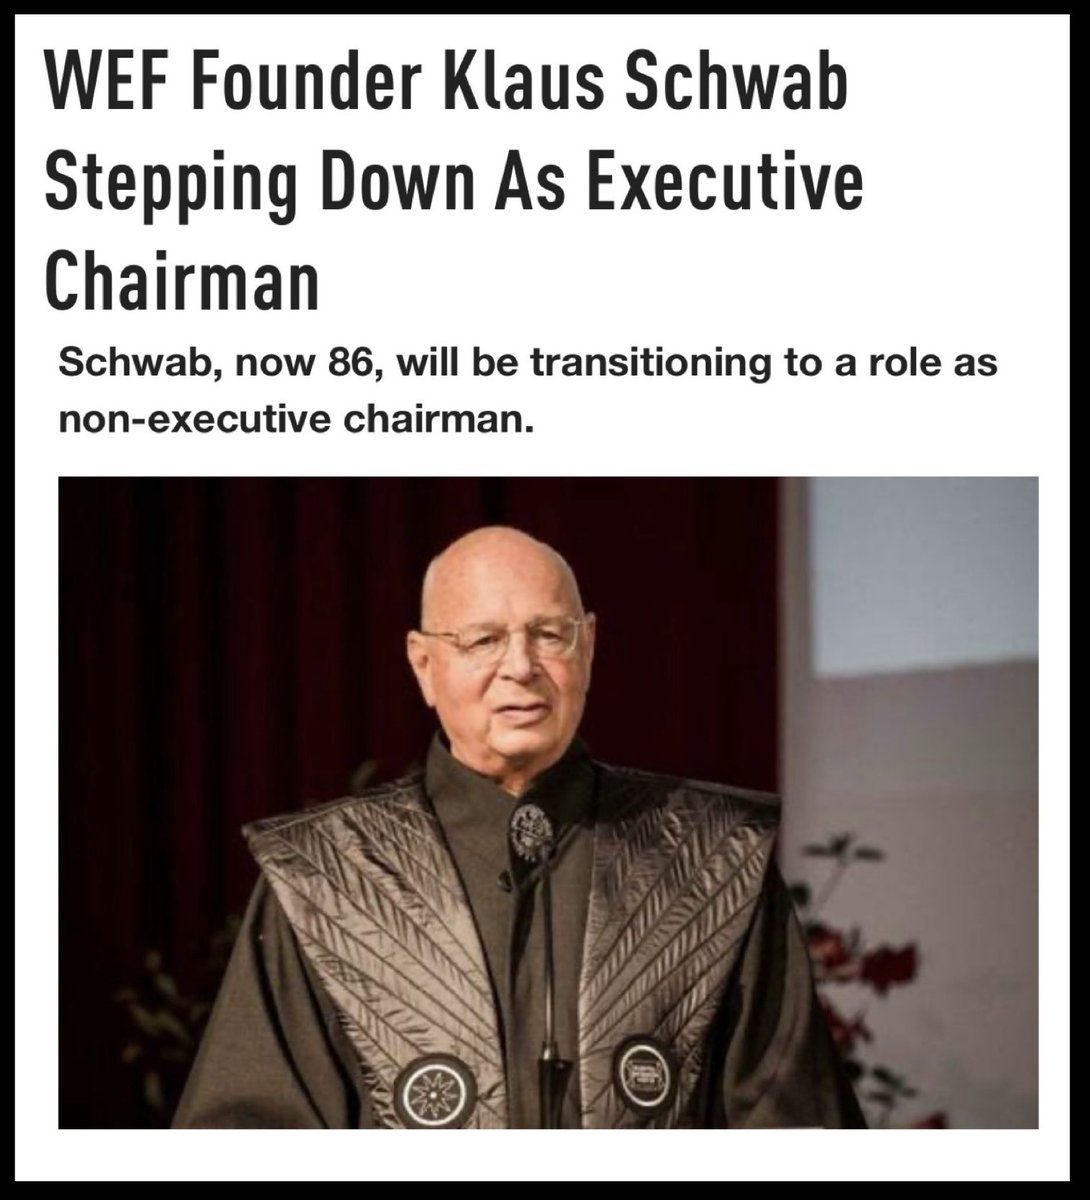 Schwab has seeded his organisation with various family members to take up the tyrannical new world order torch - Schwab’s children appointed to high-ranking positions and his wife Hilde heading the organization’s foundation and awards ceremonies in Davos. zerohedge.com/geopolitical/w…